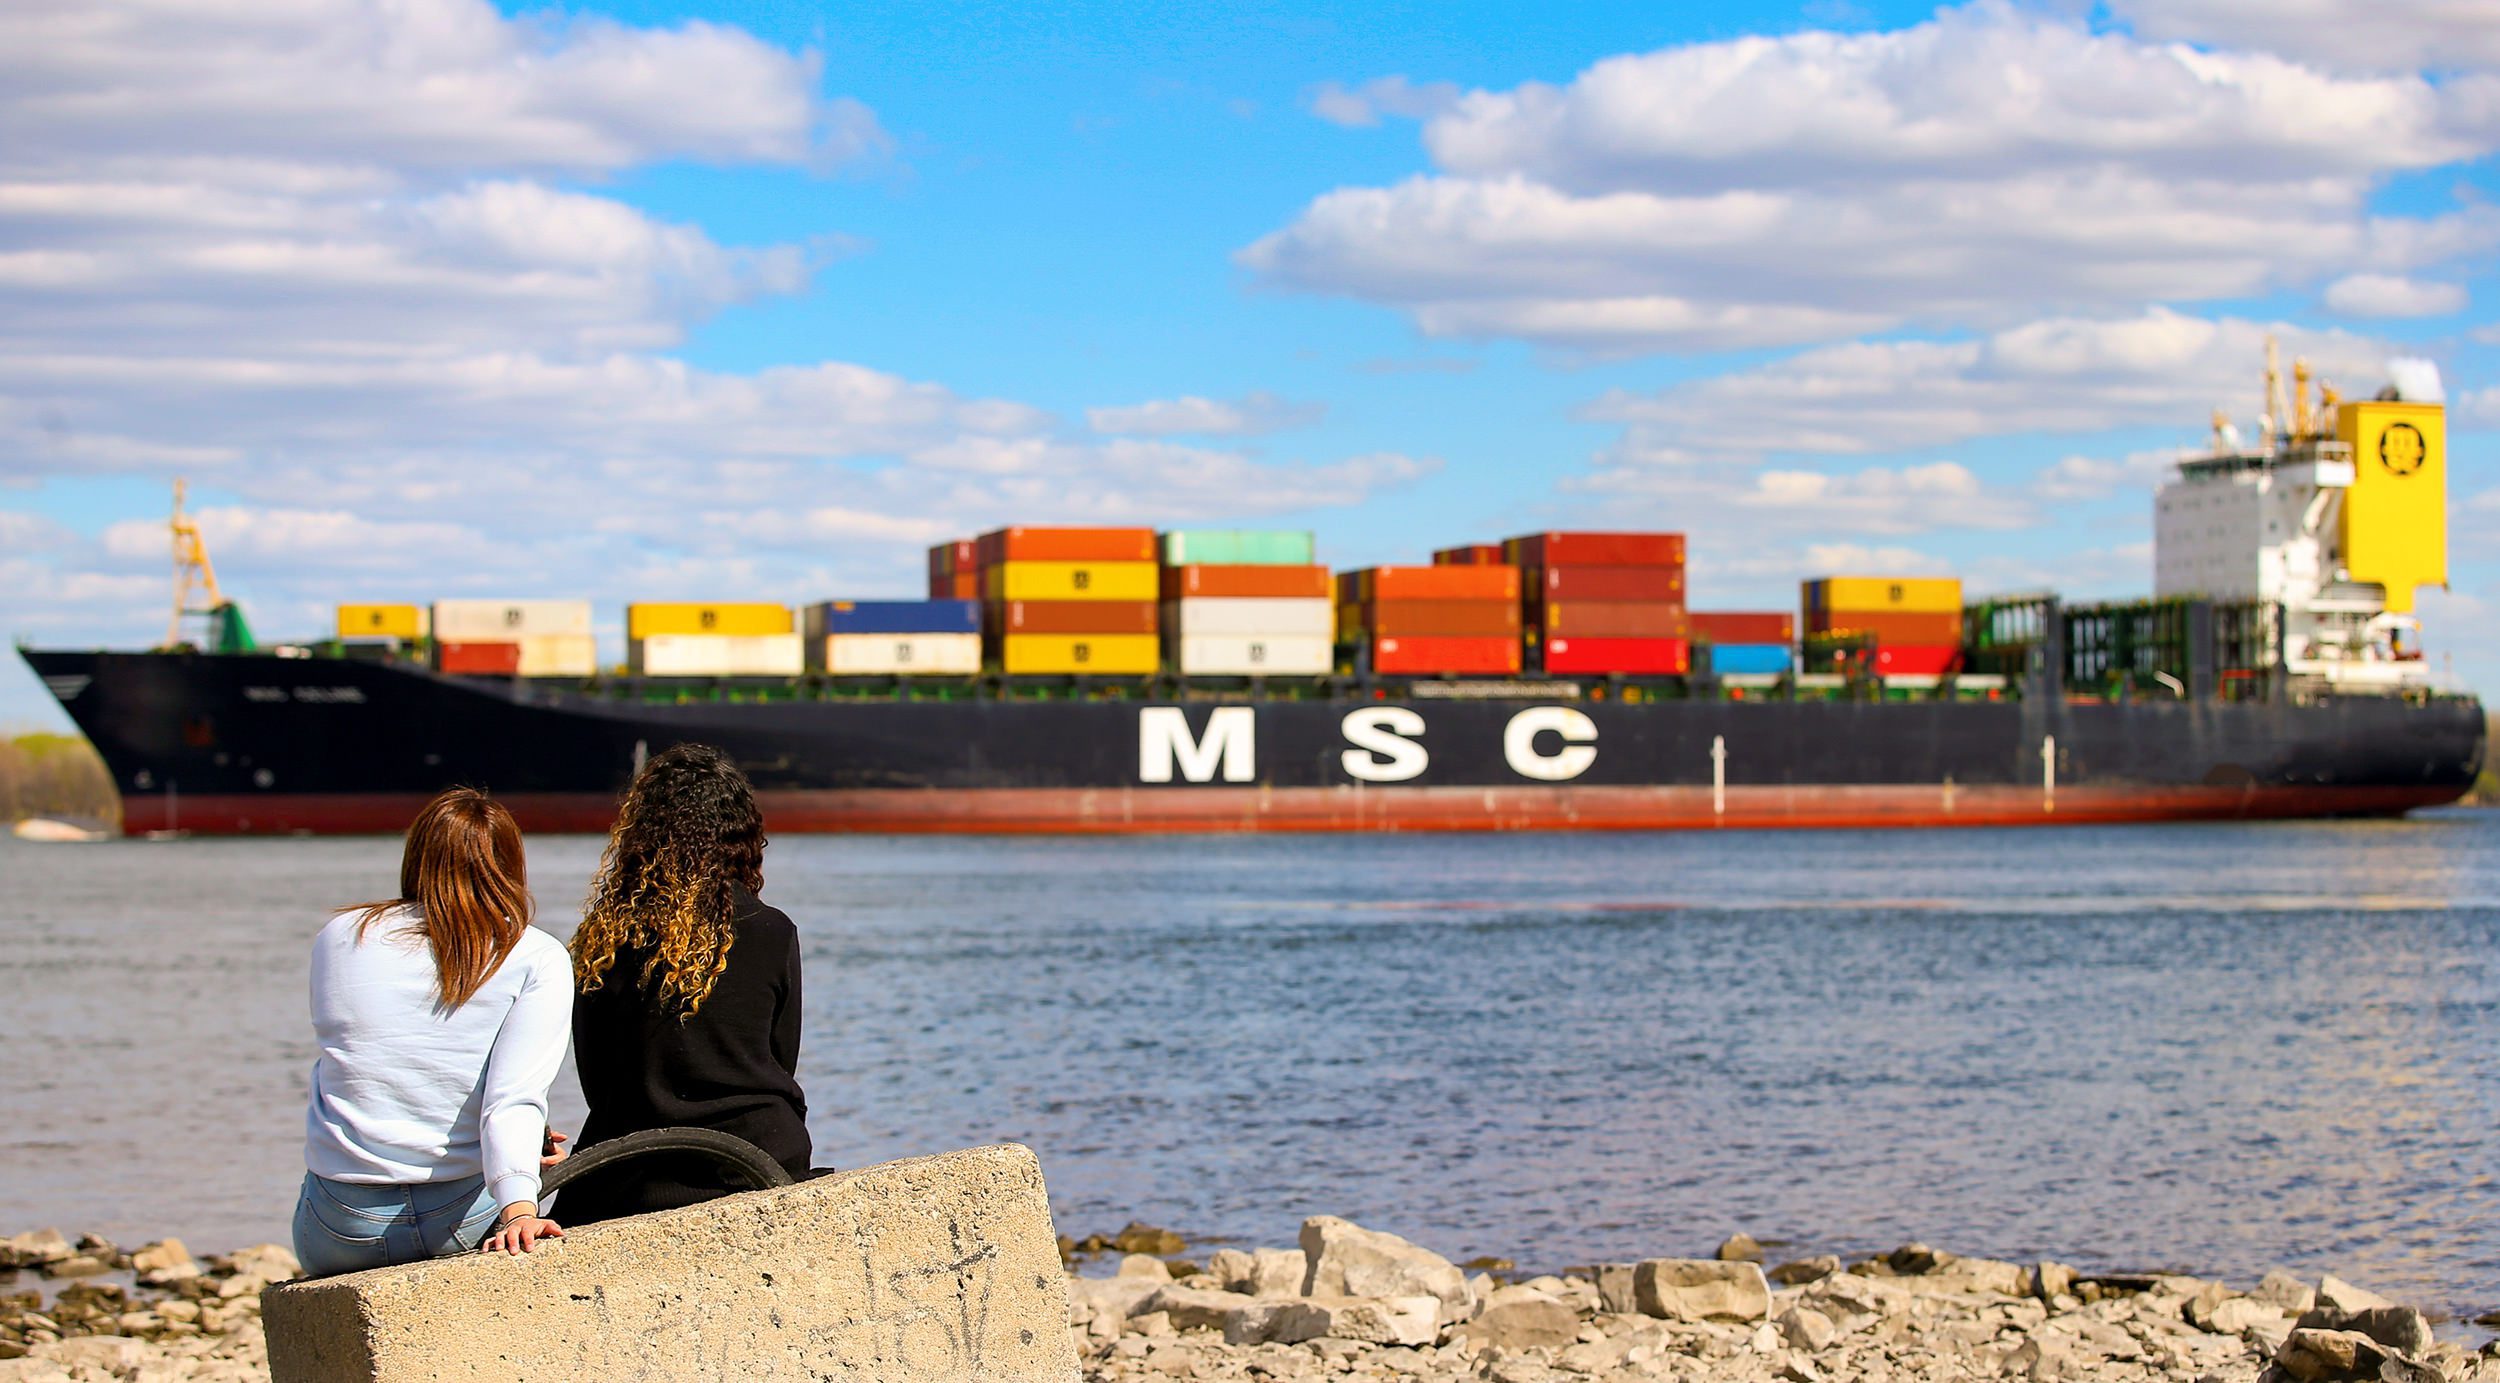 MSC container-ship Port of Montreal Canada